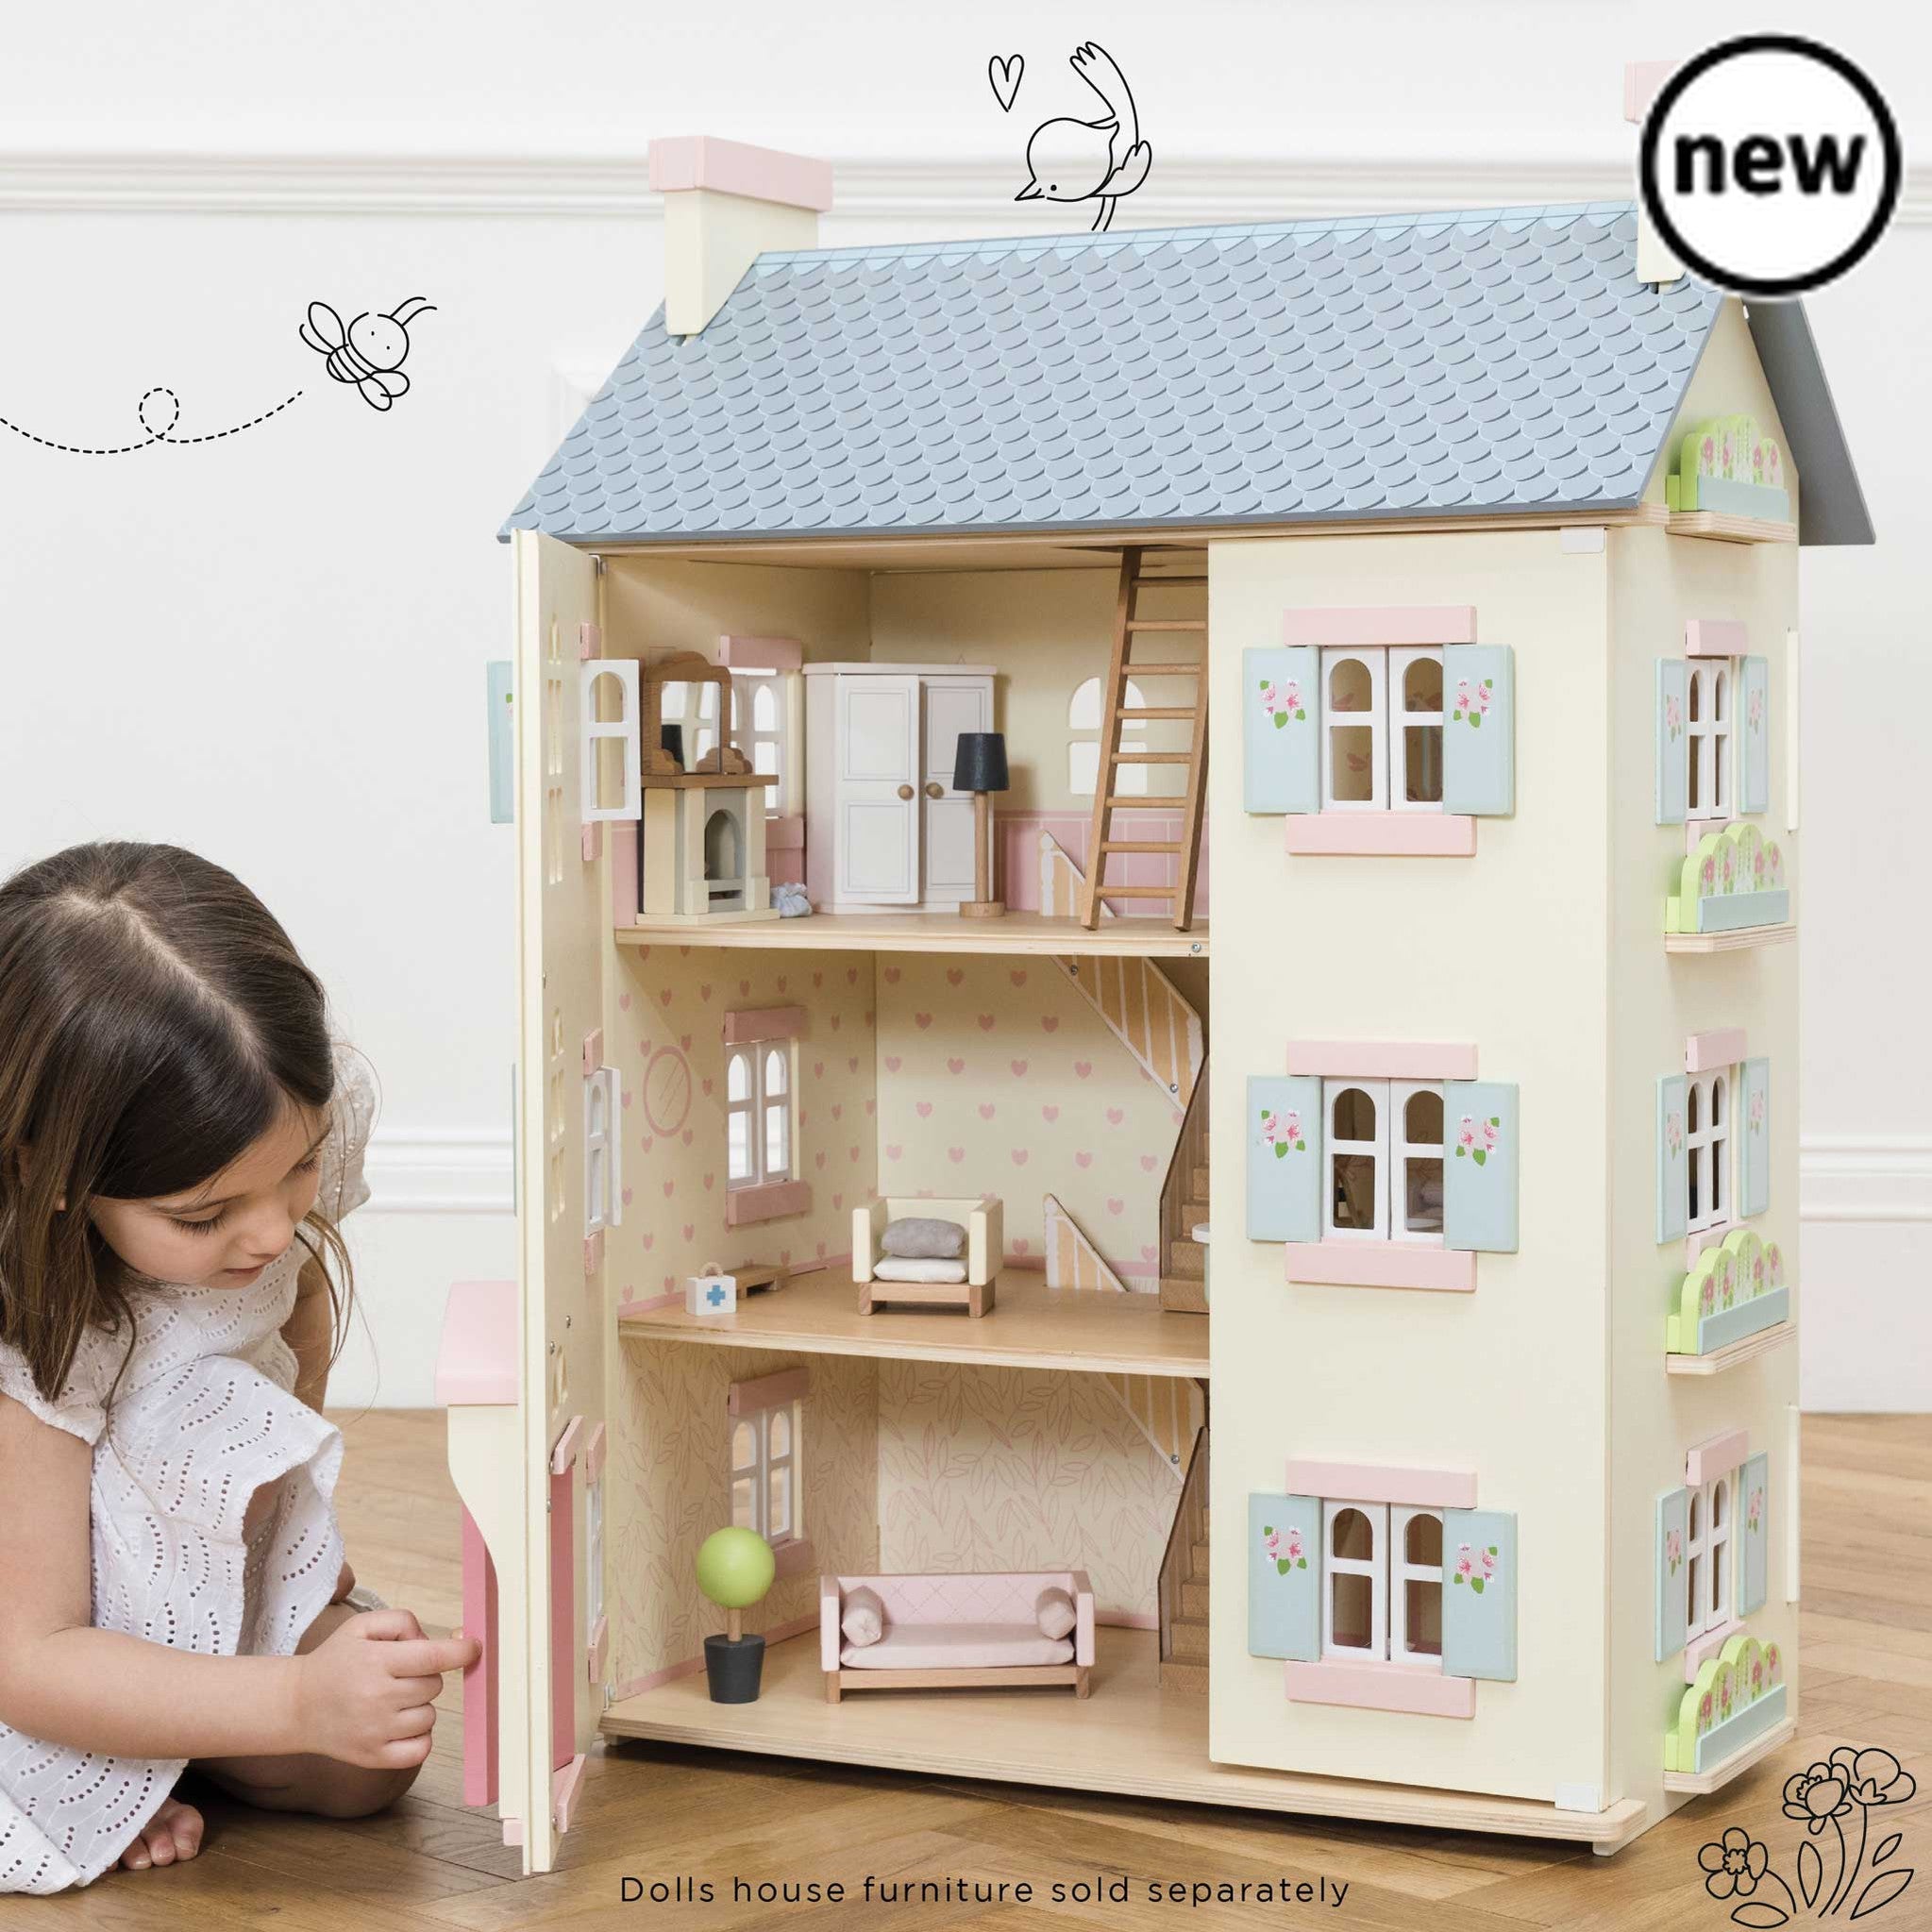 Cherry Tree Hall Doll House, Description Welcome home! This grand 4 storey wooden dolls house makes a stunning addition to your child’s toy collection. Role play fun adventures await with this simply stunning toy doll house, fitting for any miniature lord or lady. Full of exquisite details, this grandiose home is fully painted in soft creams with pink and blue accents and sweet flower motif detailing. A beautiful arched window feature sets off this truly magnificent house and the handsome front door is just